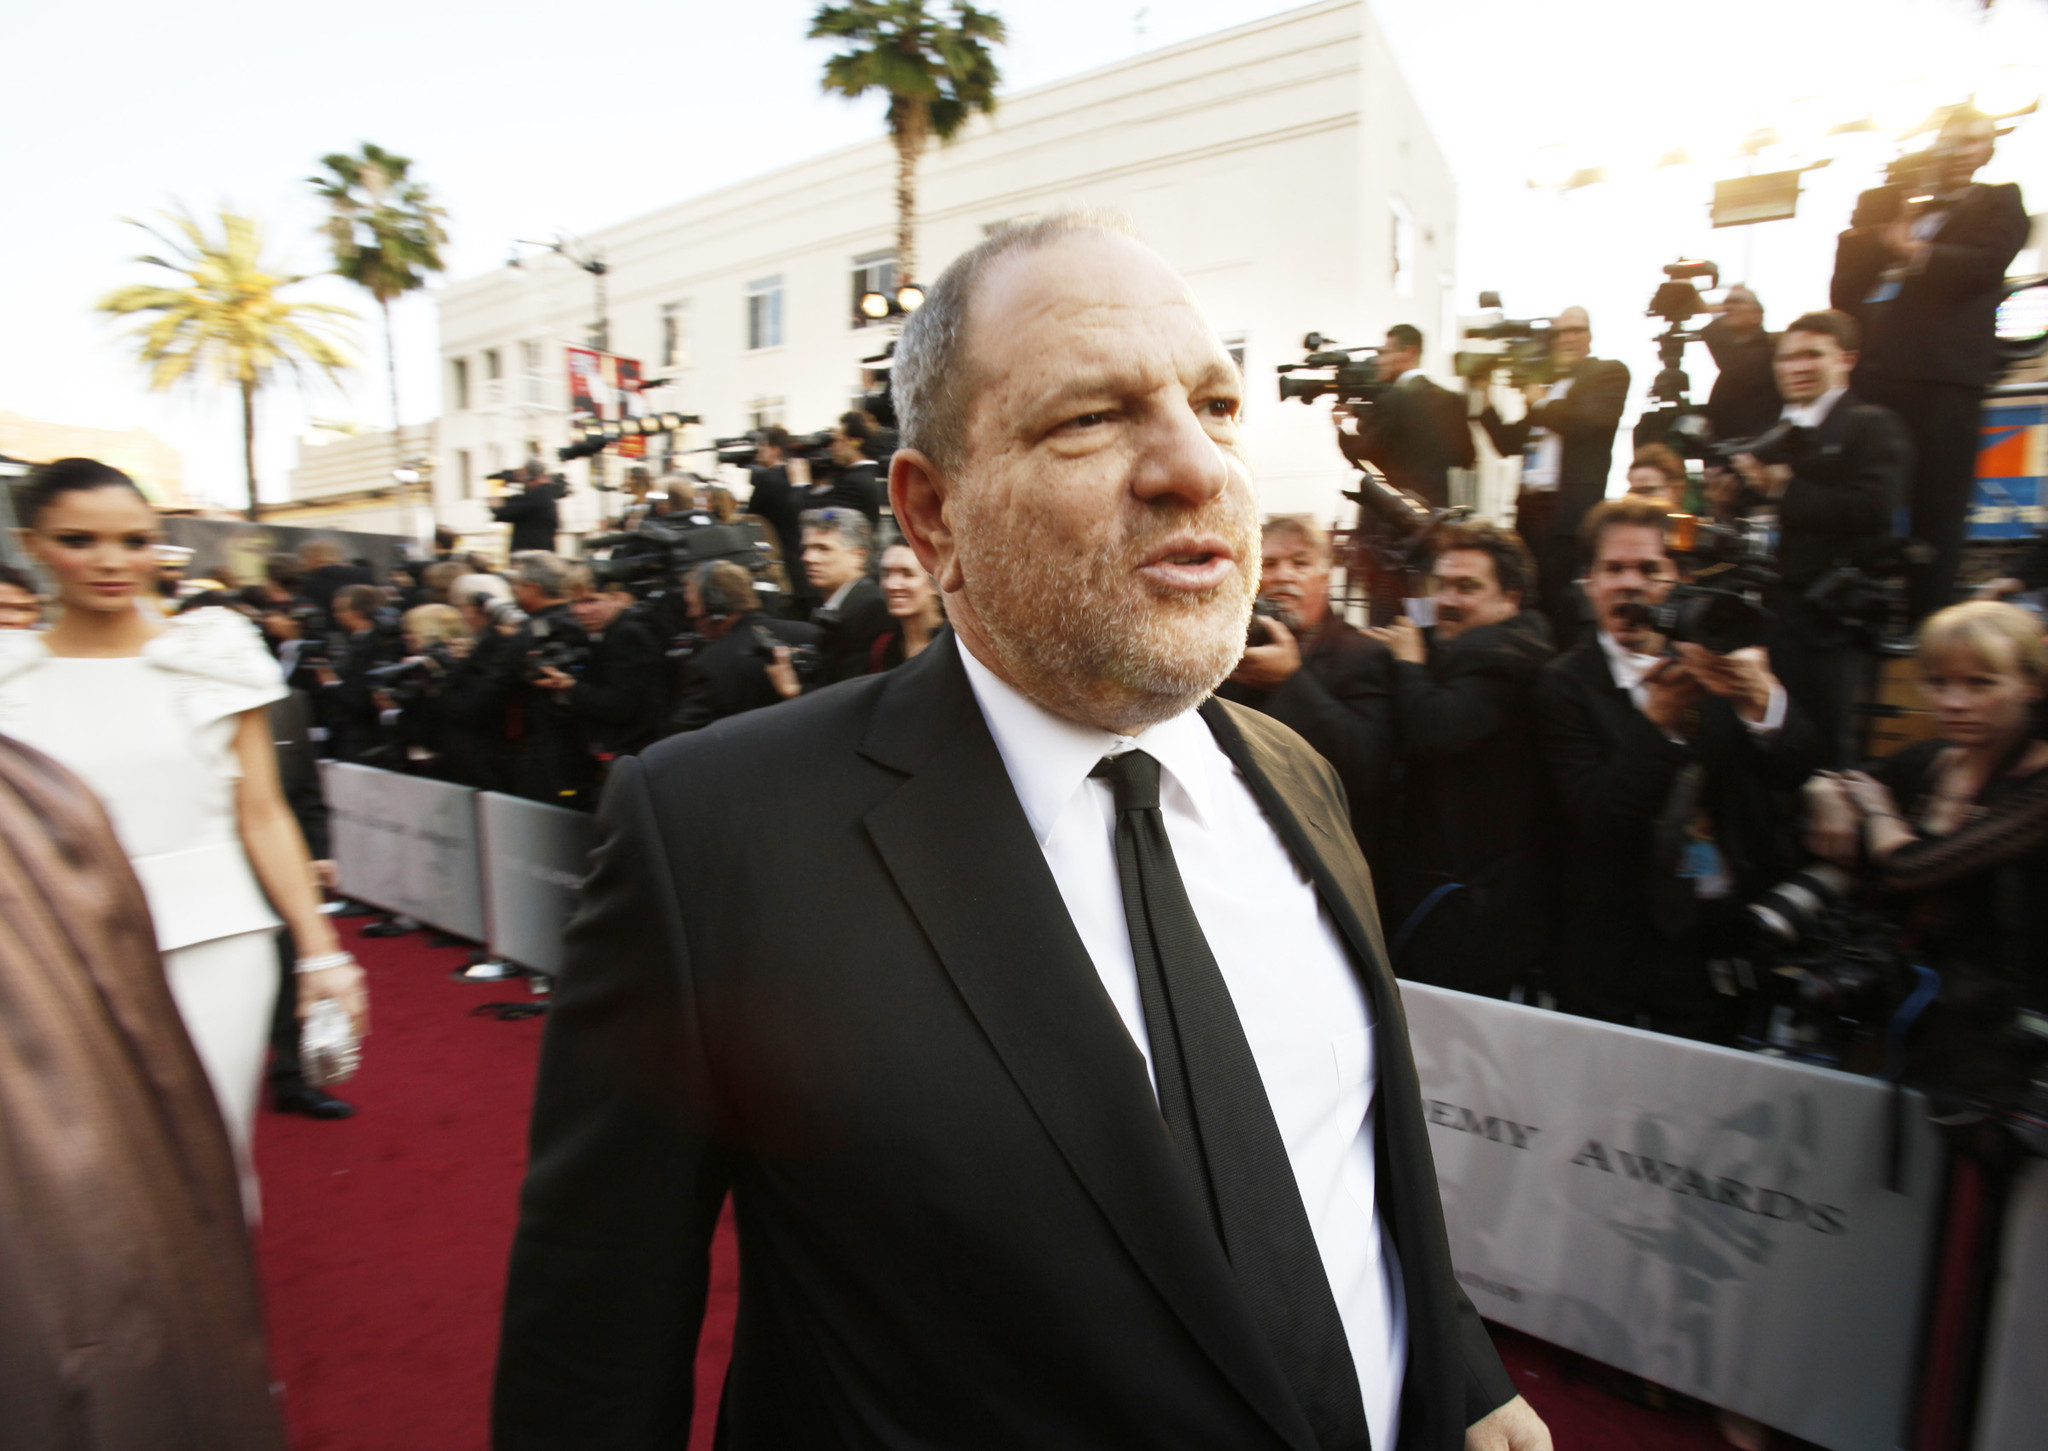 Weinstein Co. is facing a crisis amid sexual harassment allegations against Harvey Weinstein. (Al Seib / Los Angeles Times)